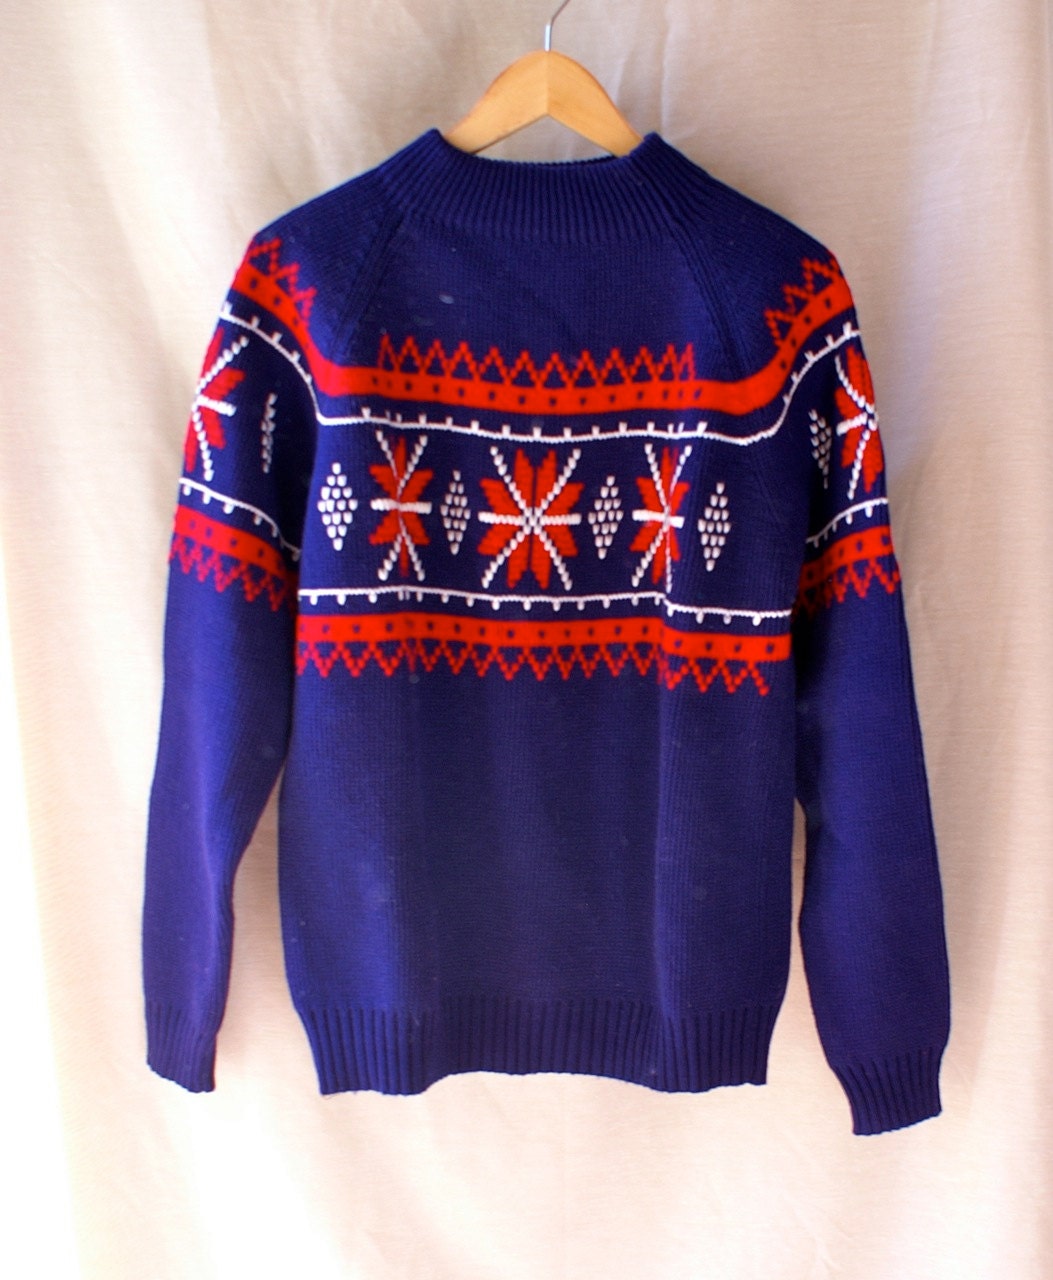 Classic Ugly Christmas Sweater Vintage JCpenney by seedwingwonder